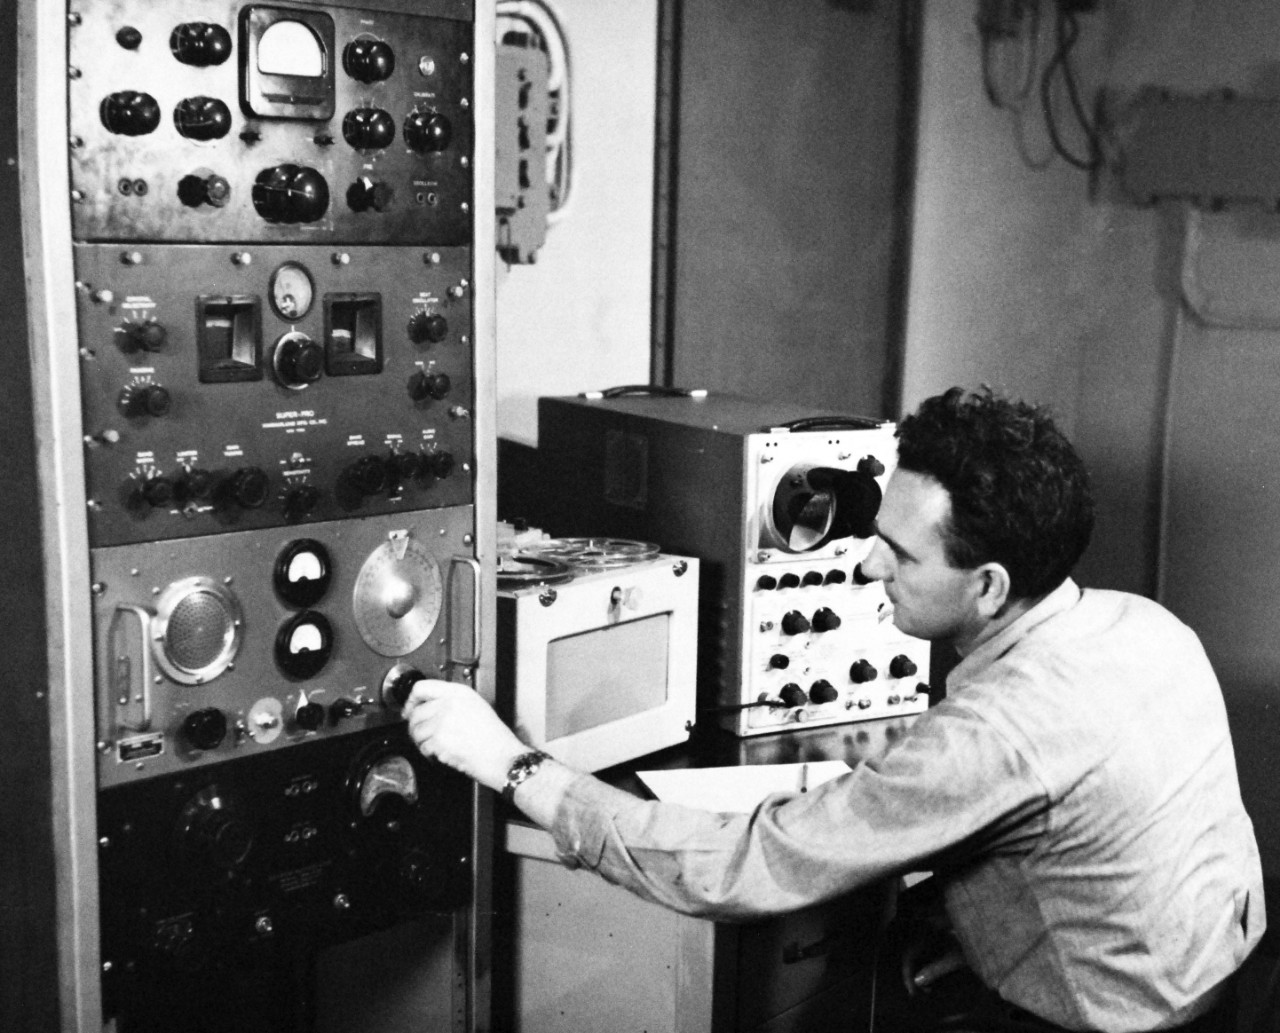 330-PS-8850-4:  U.S. Navy Conducts Physical Studies By Telephone.  Typical shipboard unit for receiving physiological information as transmitted by radio manned by Radioman Second Class Leonard Williams, USN, March 21, 1958.  Official Department of Defense photograph, now in the collection of the National Archives.   